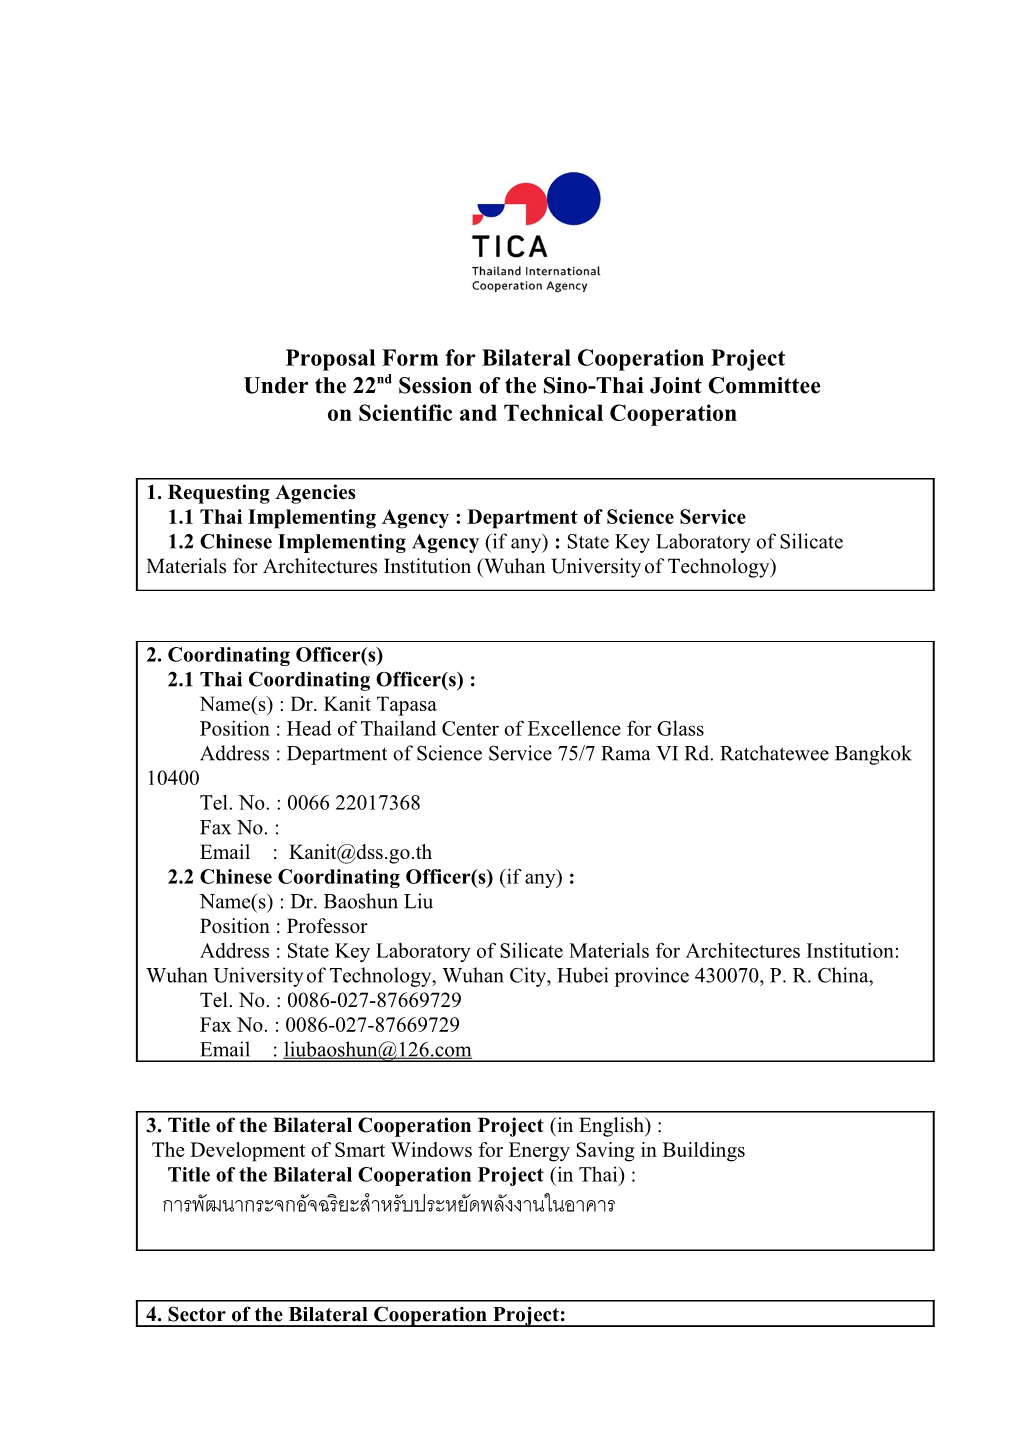 Proposal Form for Bilateral Cooperation Project